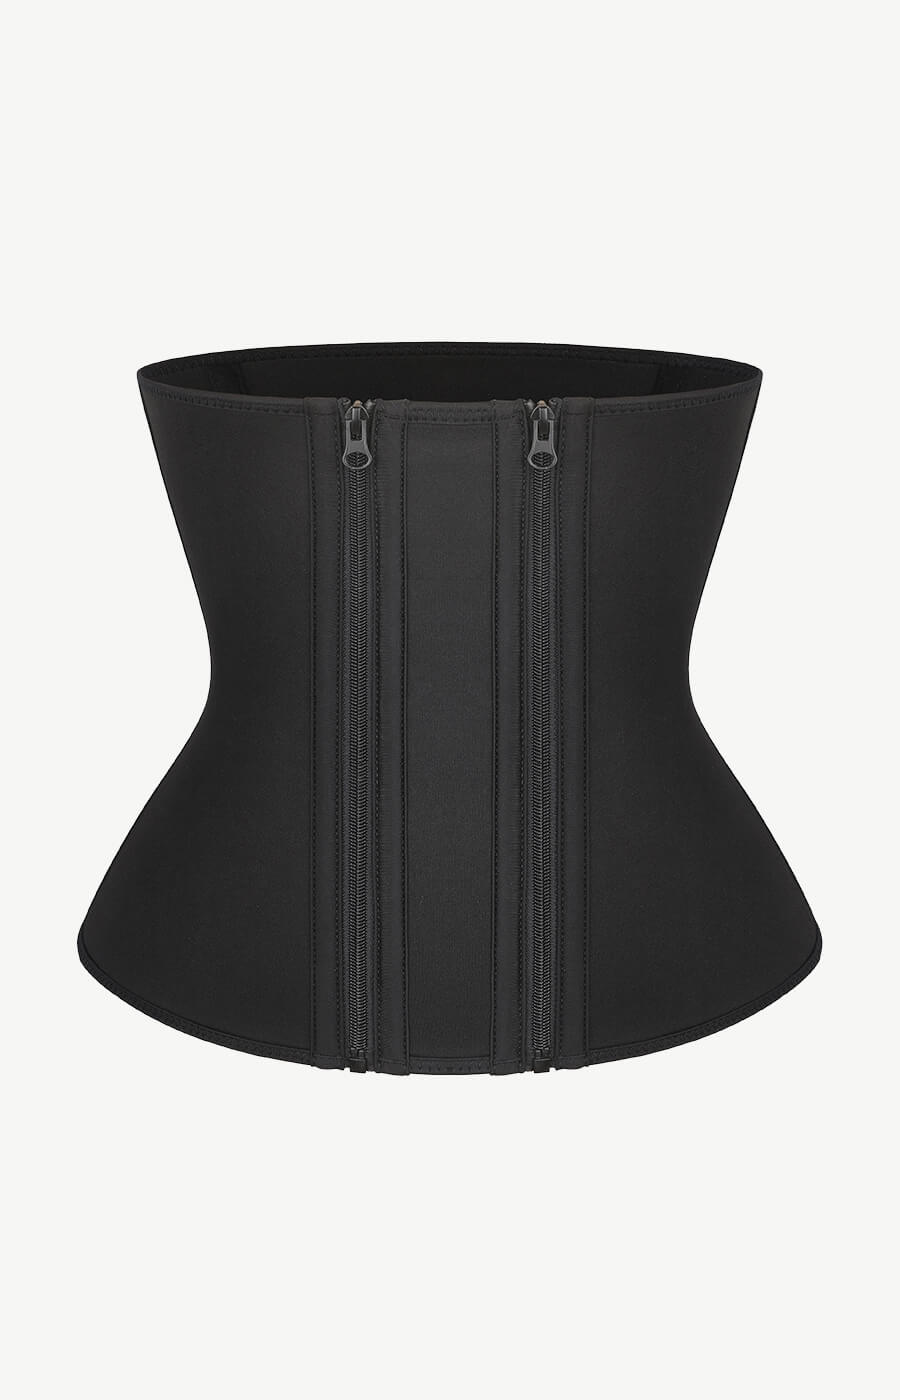 New in package! Nebility Neoprene Waist Trainer for Sweating and Weigh –  The Warehouse Liquidation